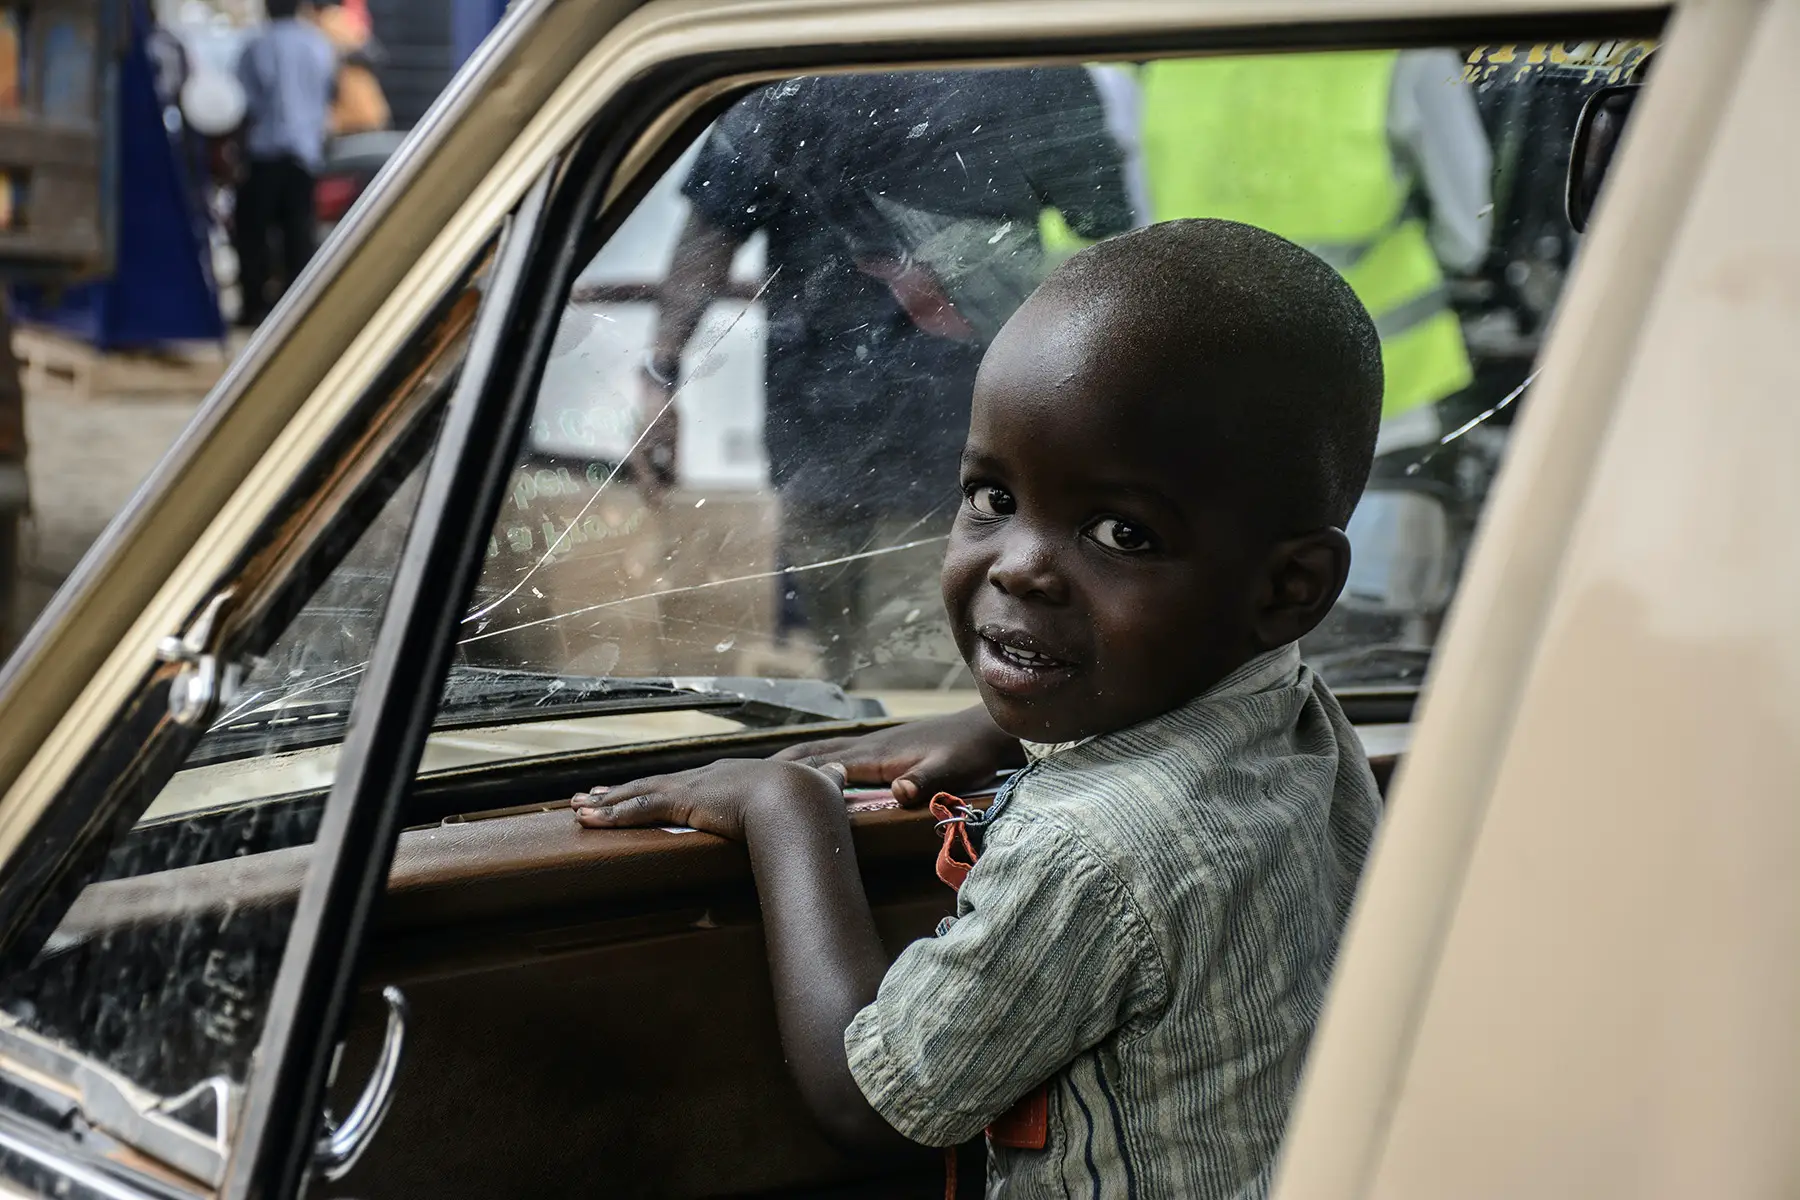 Little boy sitting in car, looks around and smiles at camera